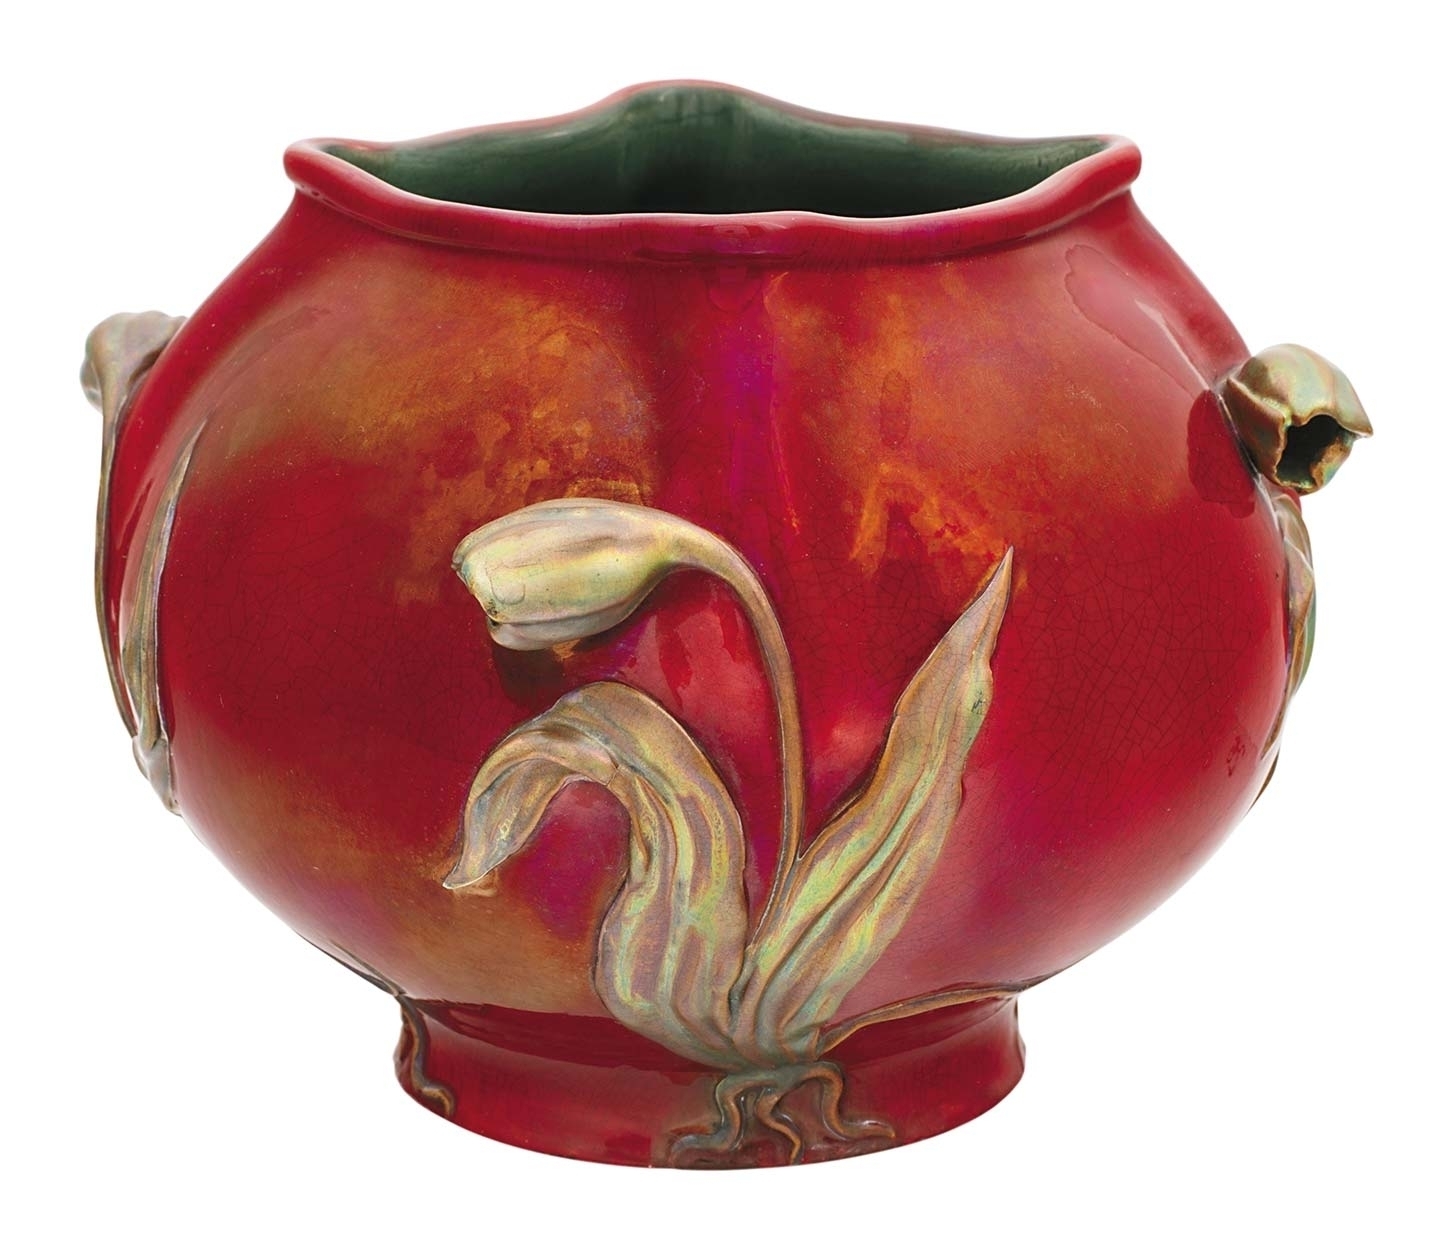 Zsolnay Curved vase with convex tulips, Zsolnay, 1900